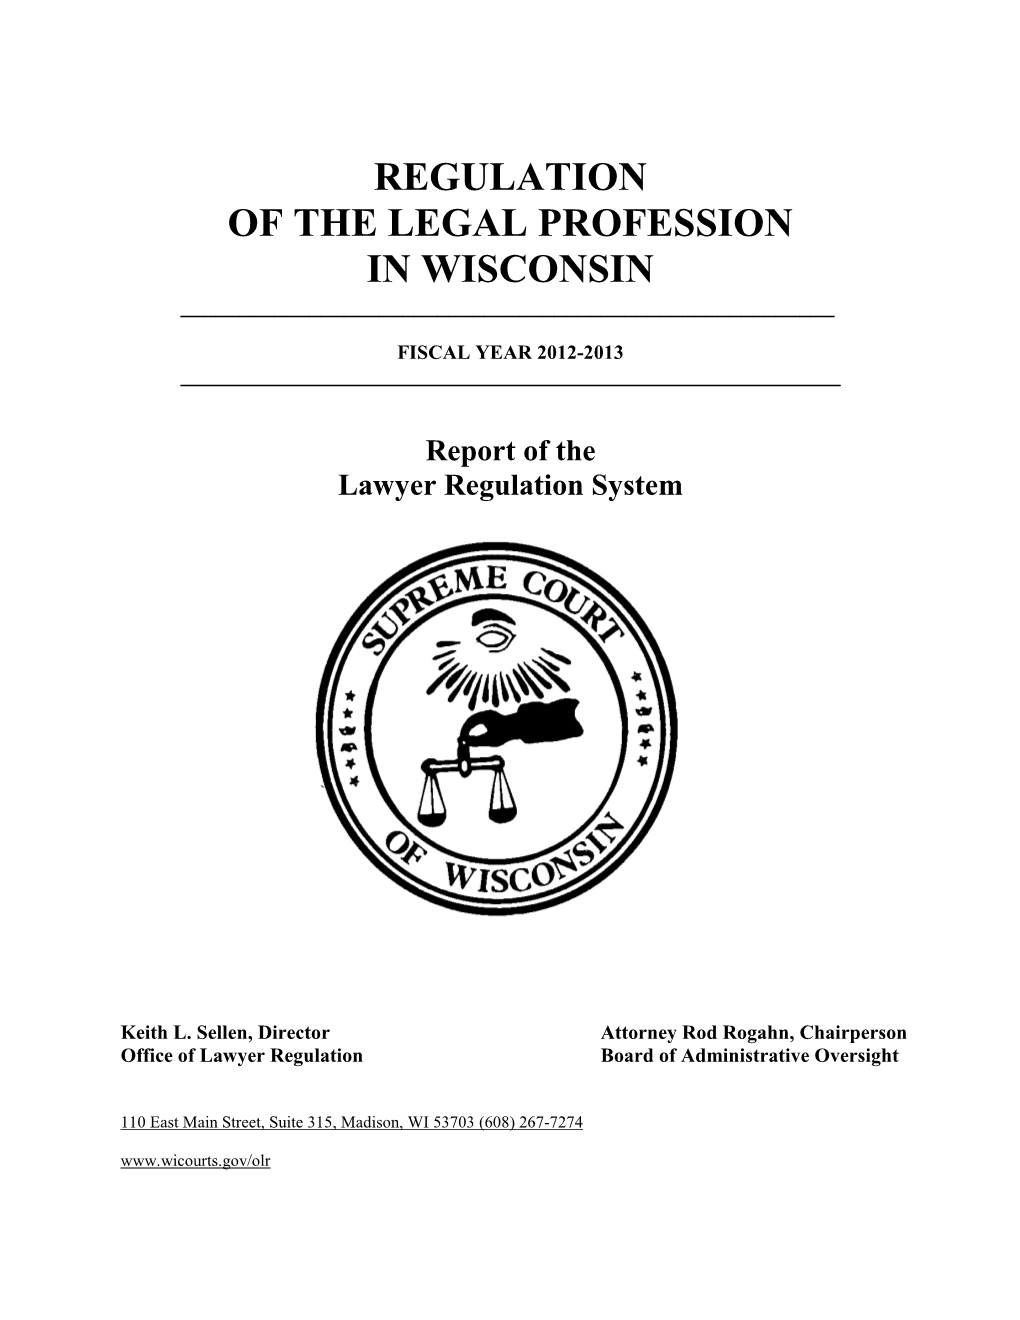 Office of Lawyer Regulation Annual Report 2012-2013